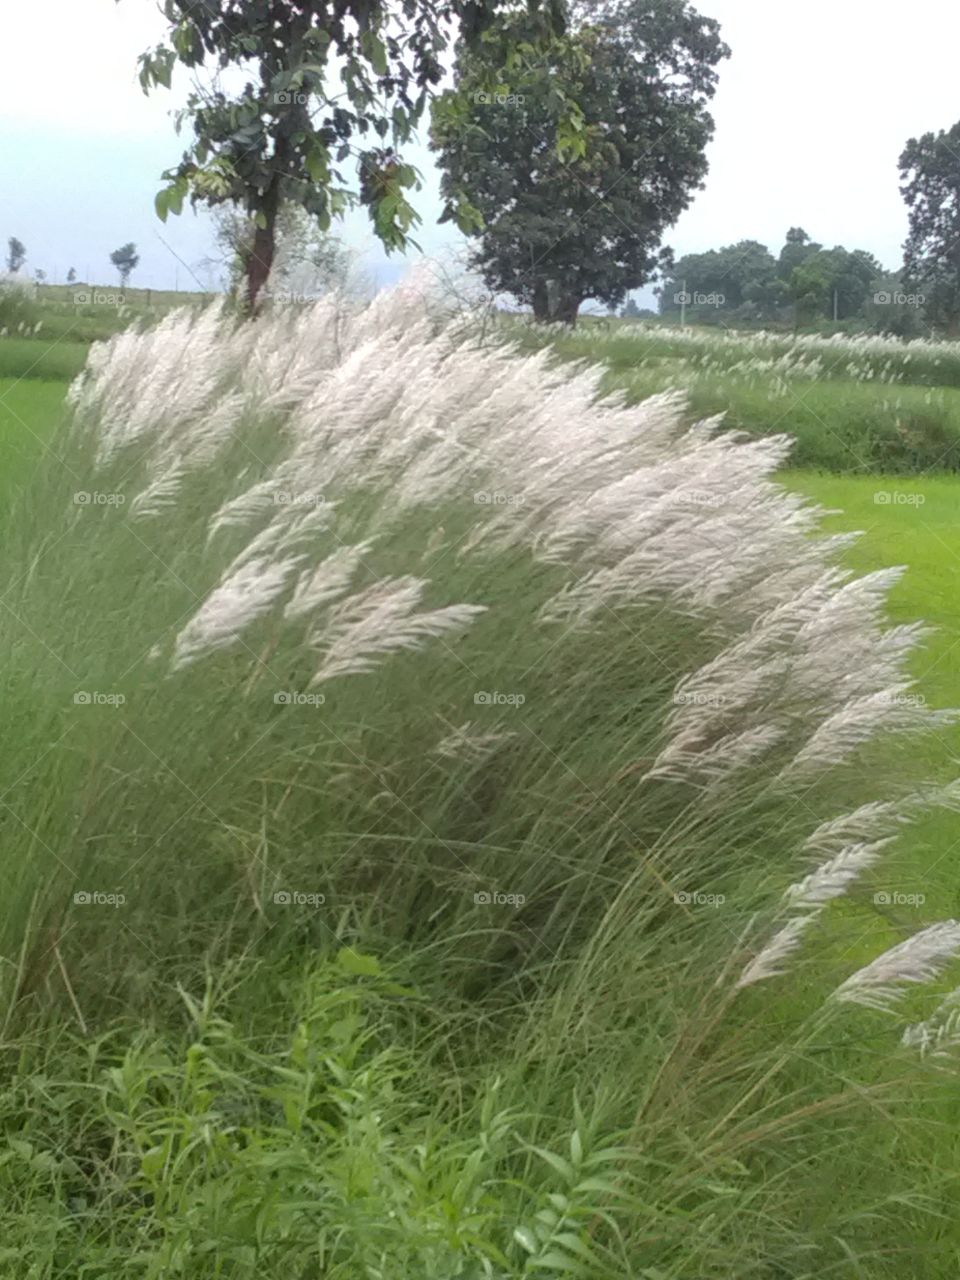 This is a very beautiful flower and very nice showing 😃wao. Grass flowers.